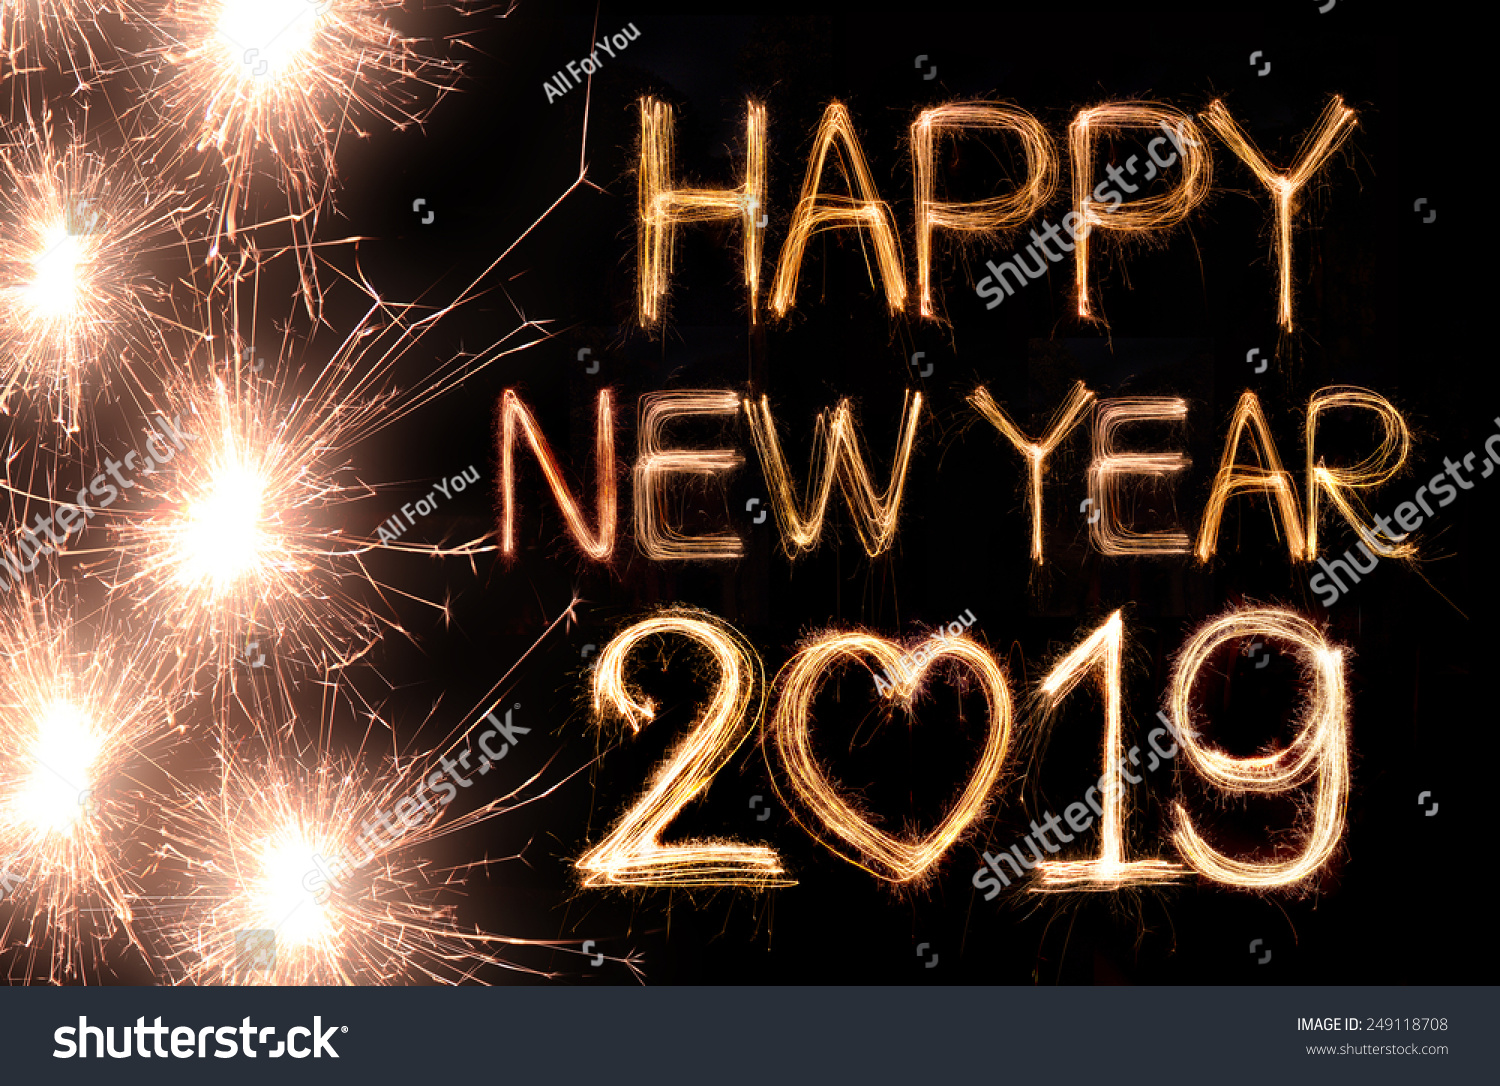 Image Gallery New Year 2019